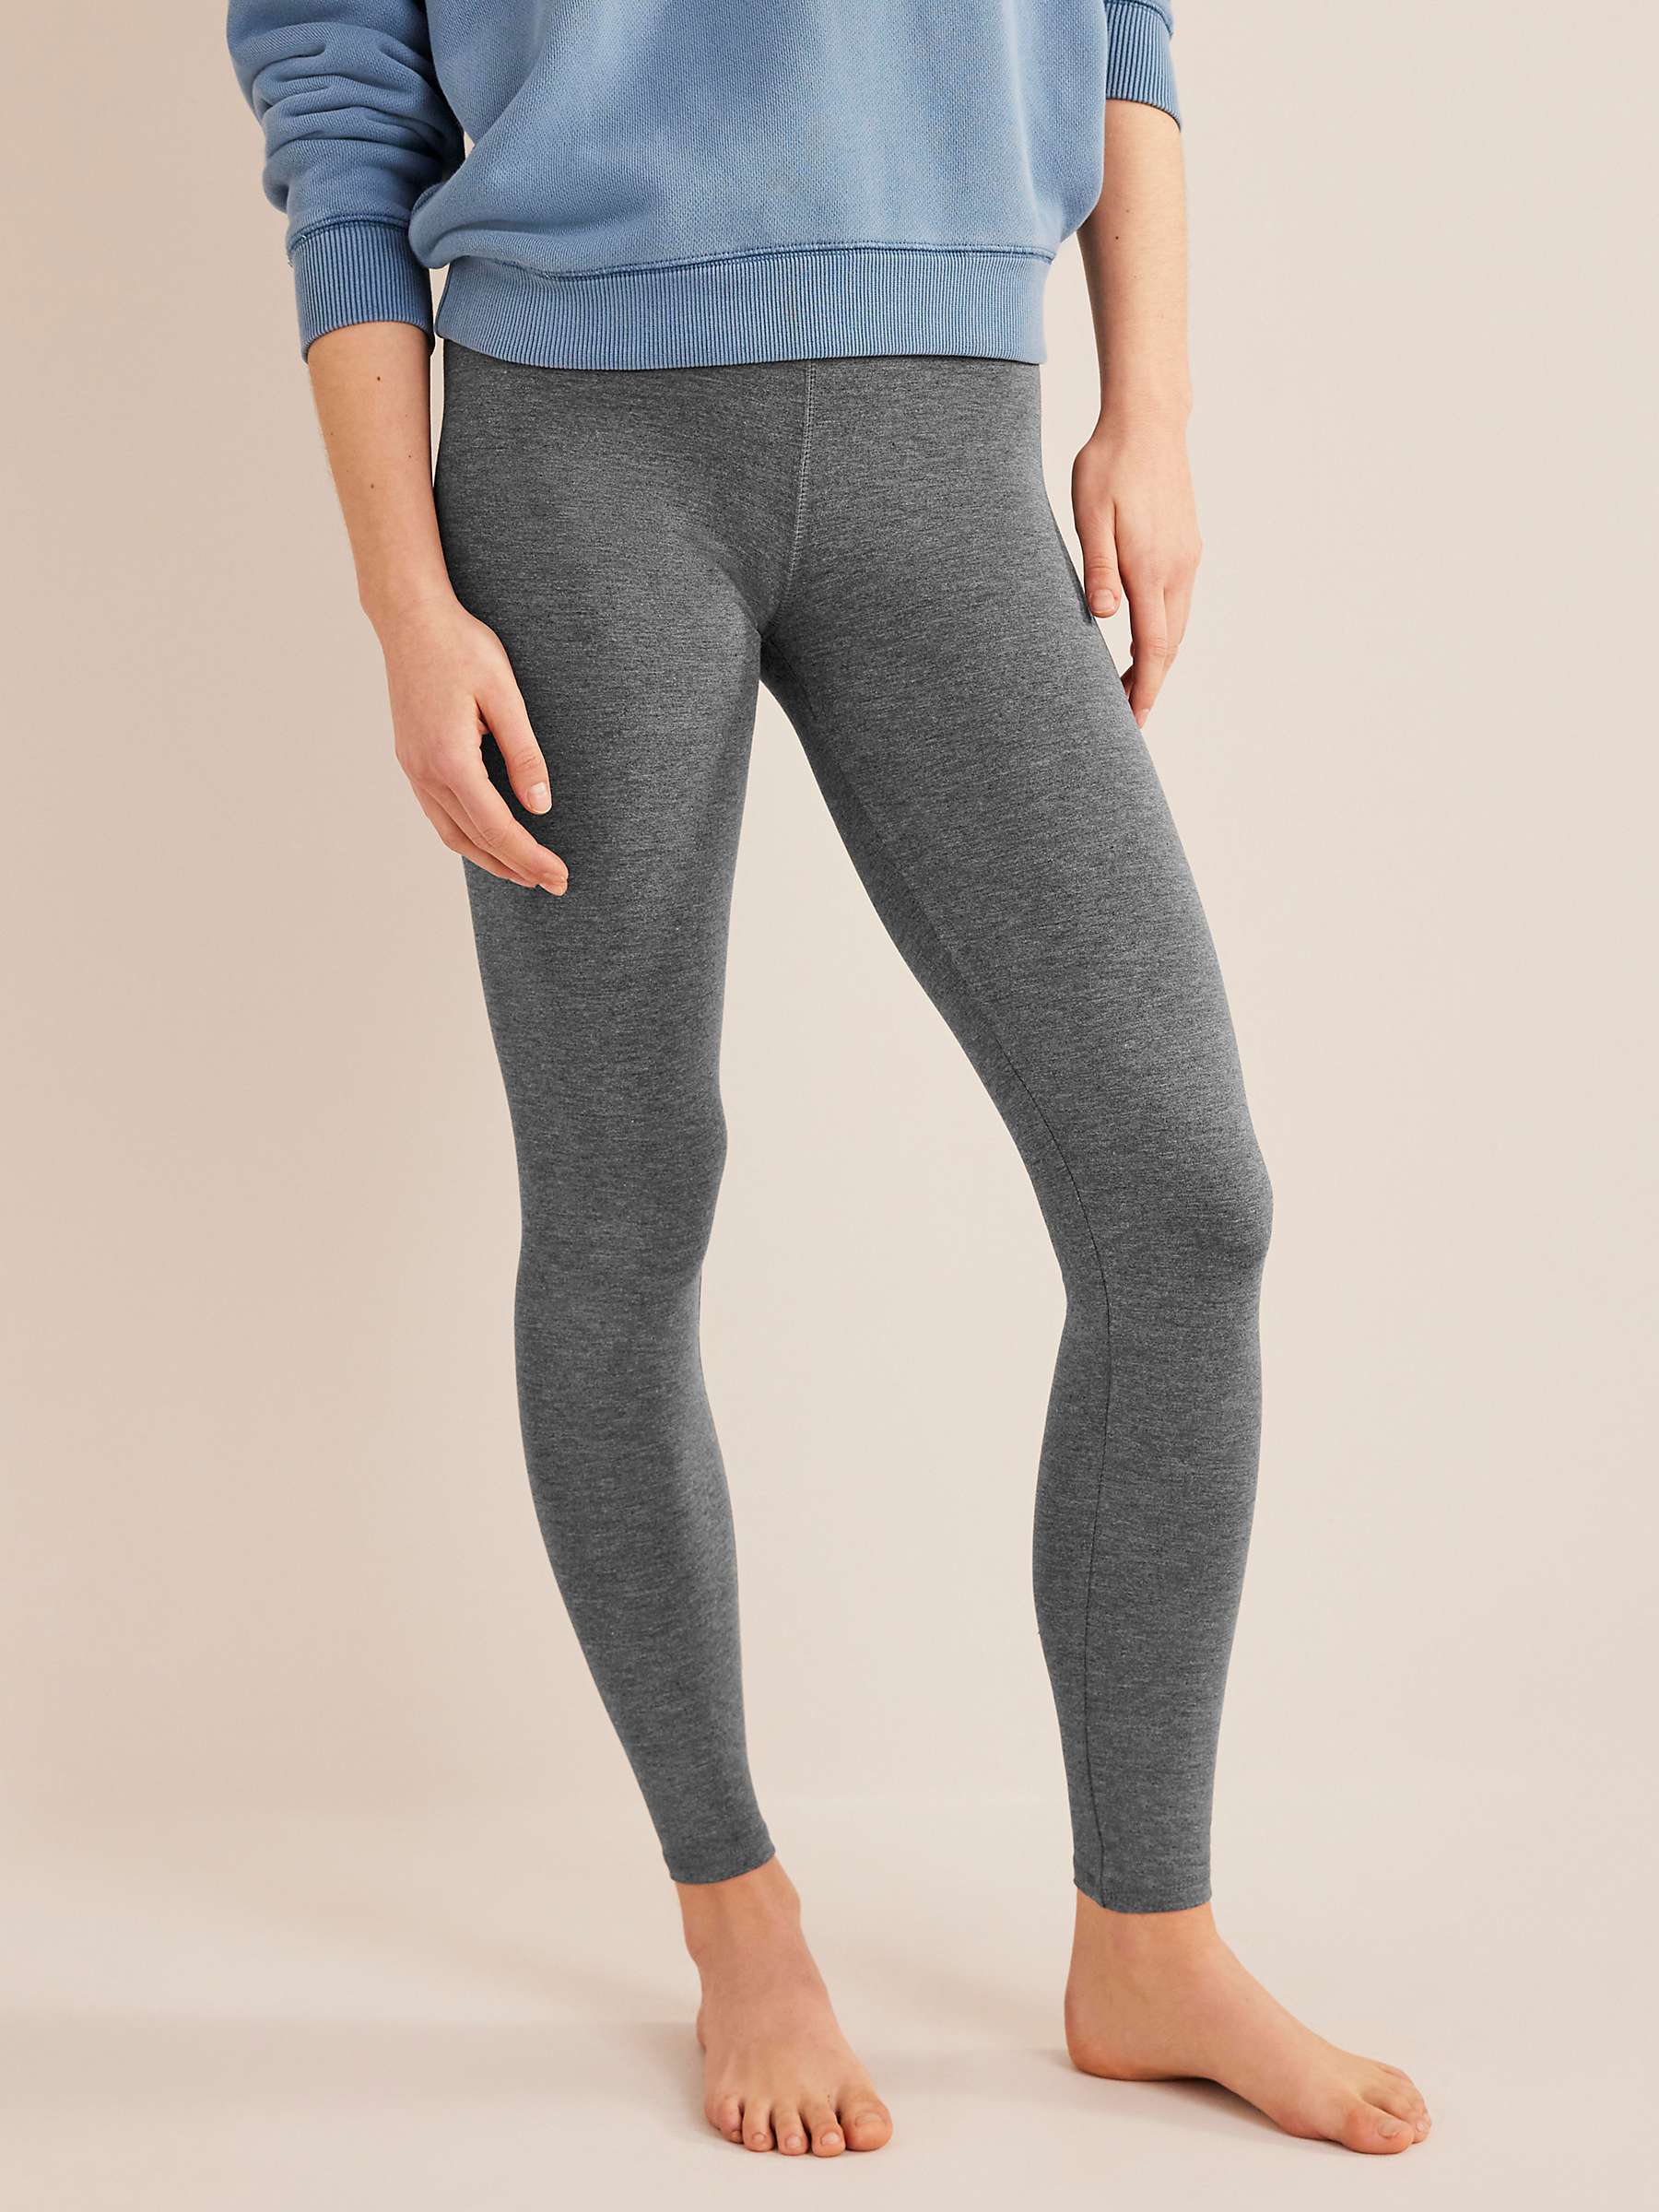 Buy Boden High Rise Jersey Leggings, Charcoal Marl Online at johnlewis.com